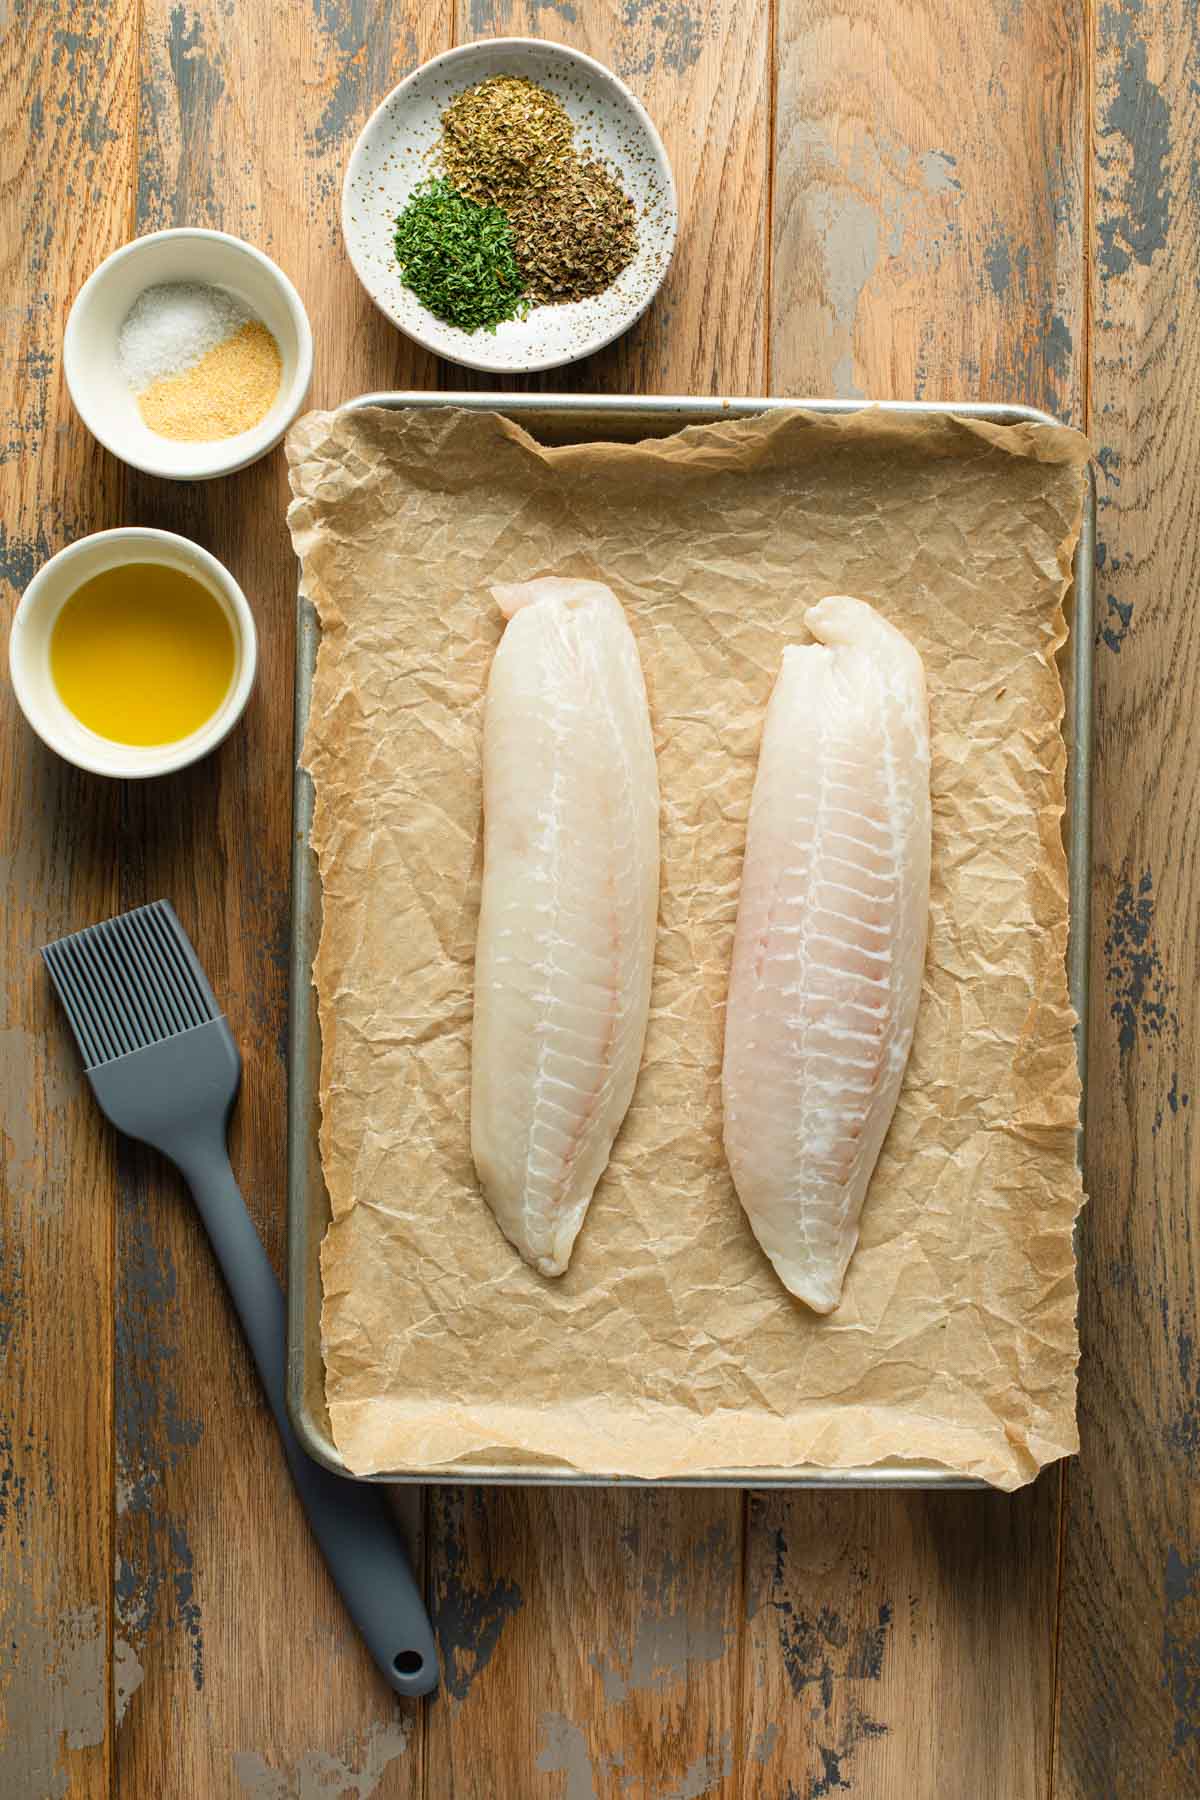 Ingredients to make air fryer tilapia arranged on a wooden table surface.